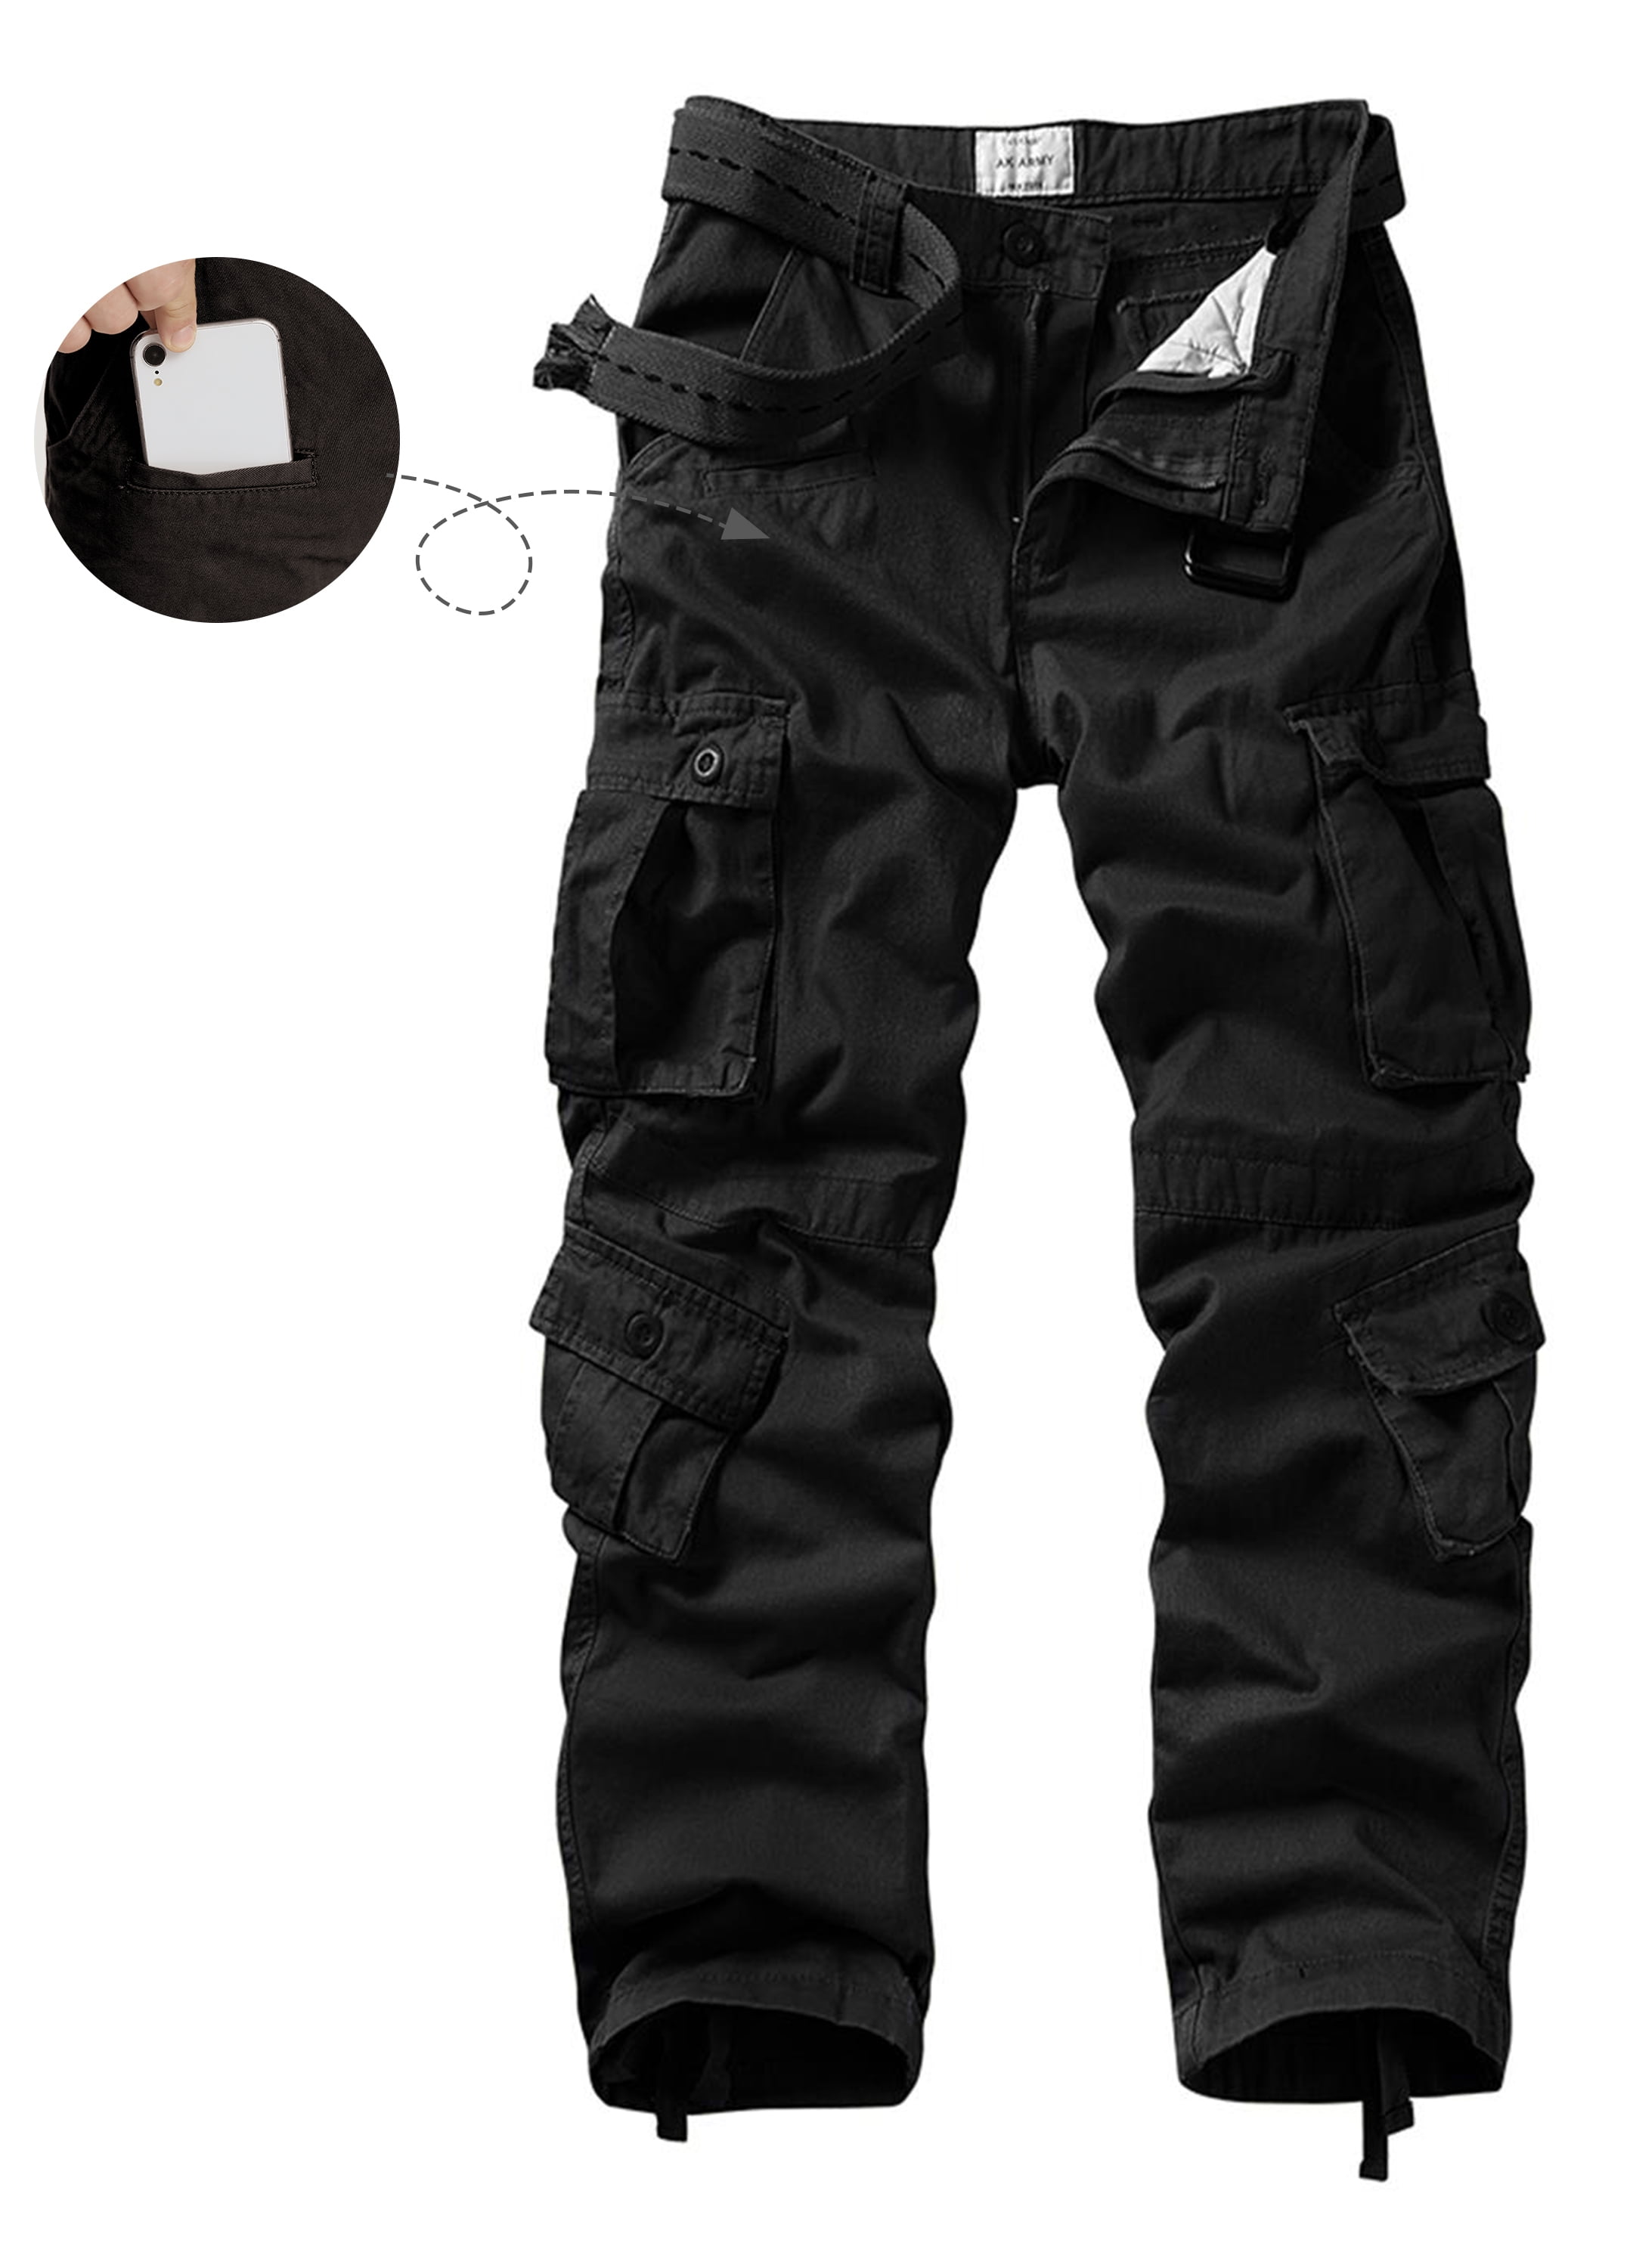 TRGPSG Men's Wild Relaxed Fit Cargo Pants with 9 Pockets(No Belt),Black ...